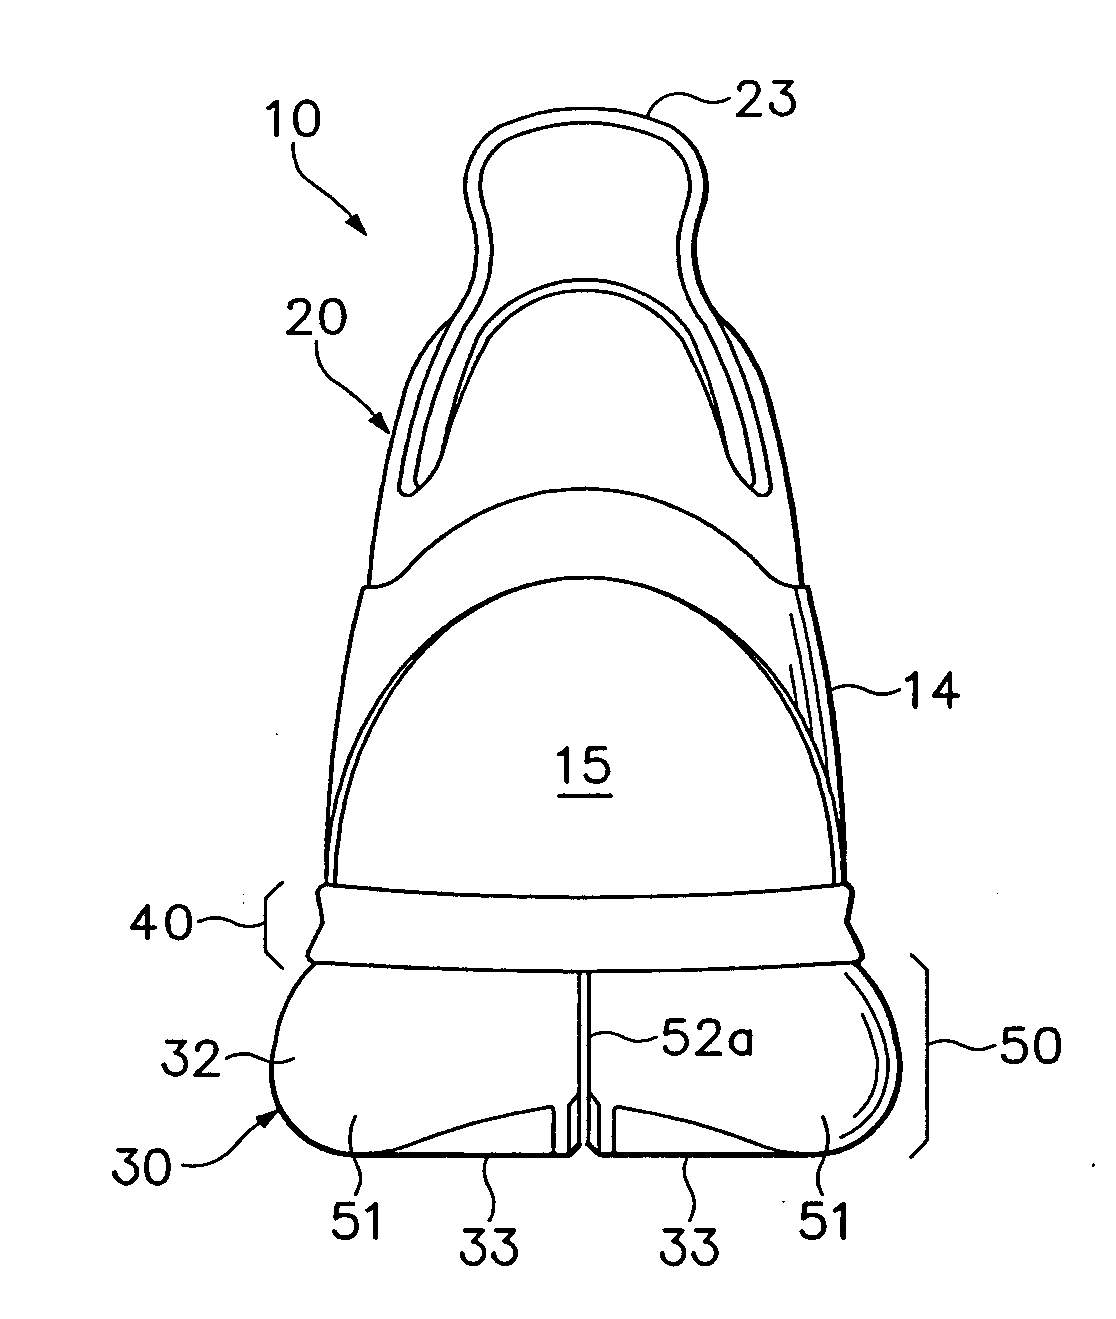 Article of footwear with an articulated sole structure